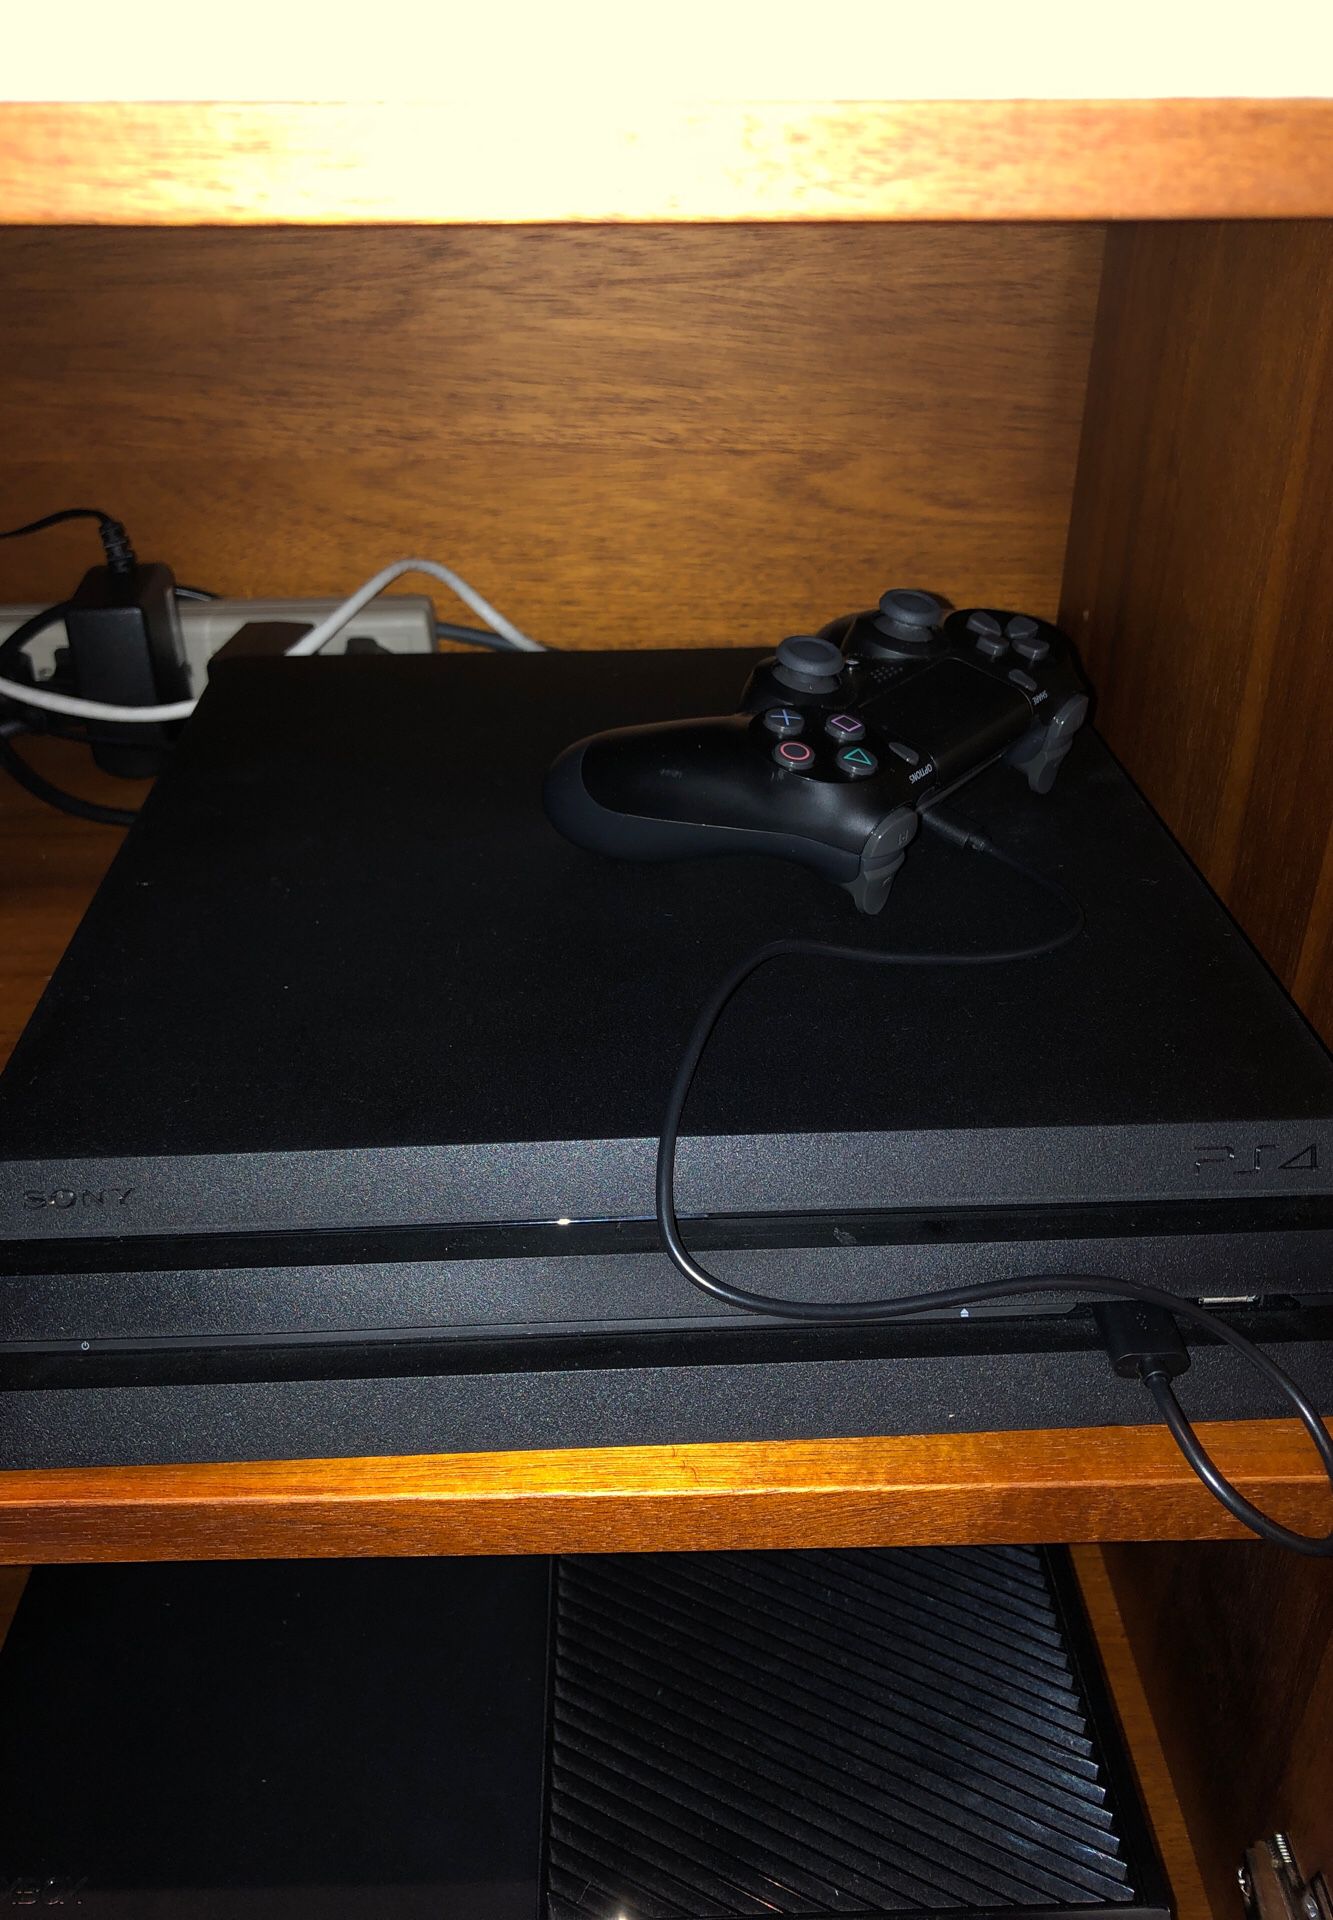 Ps4 Pro for sale. Works great.